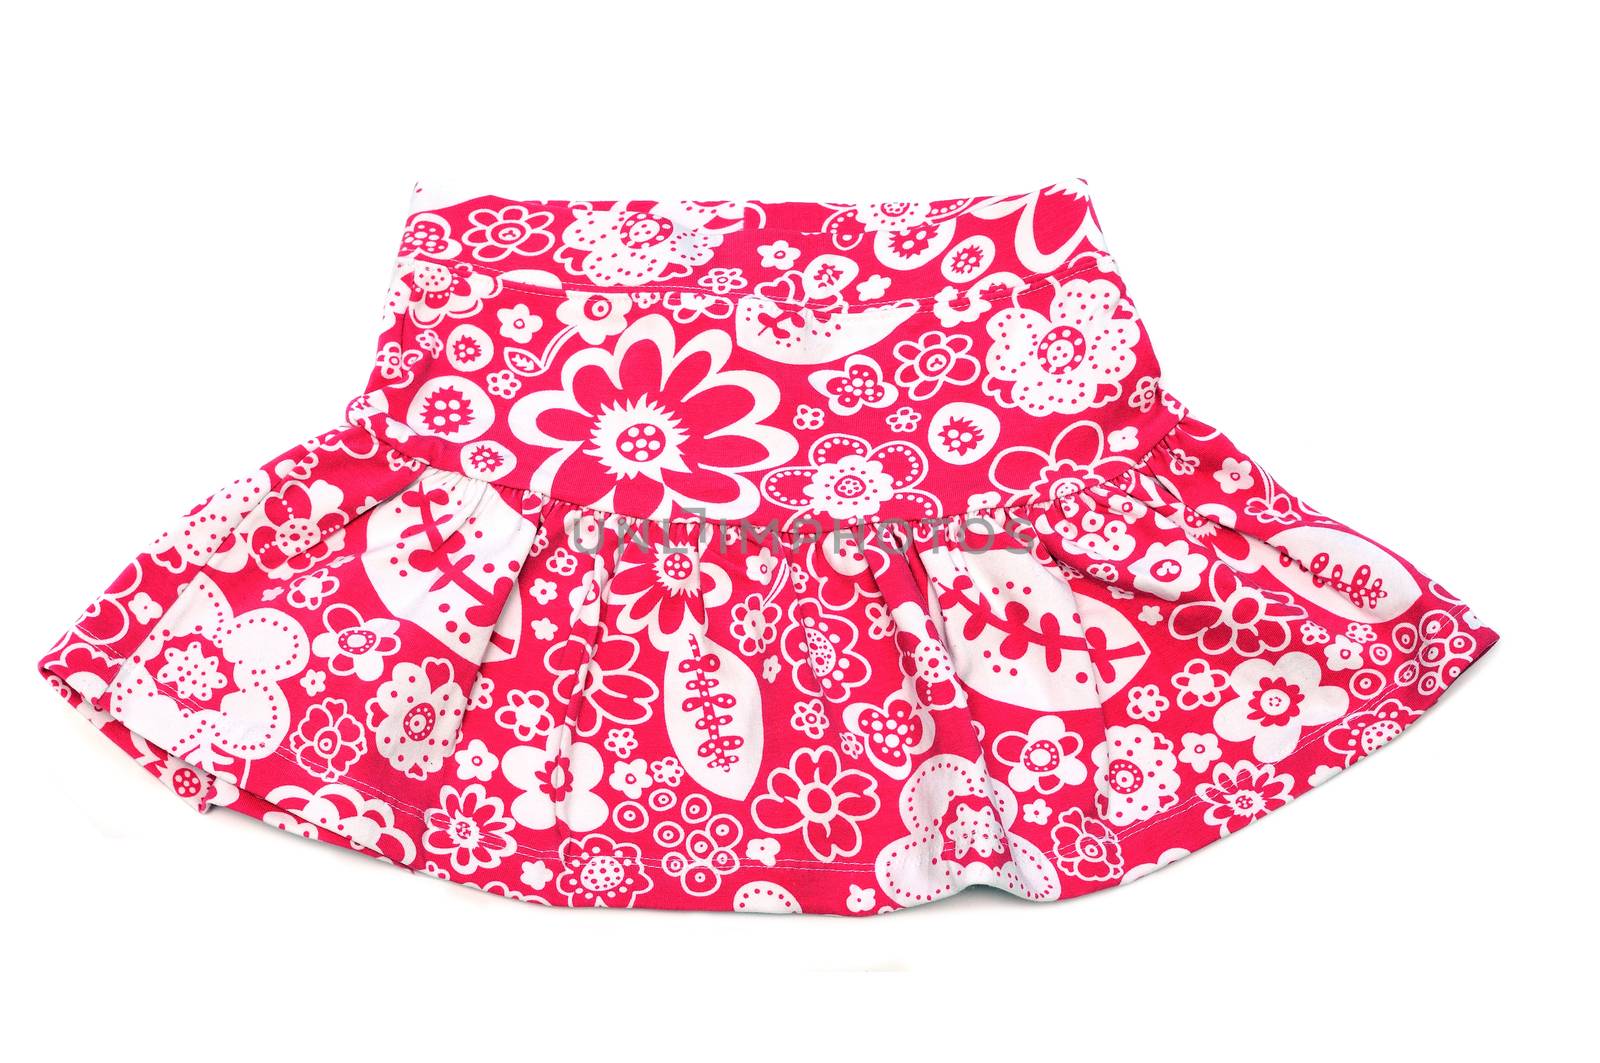 clothes: child's skirt over the white background